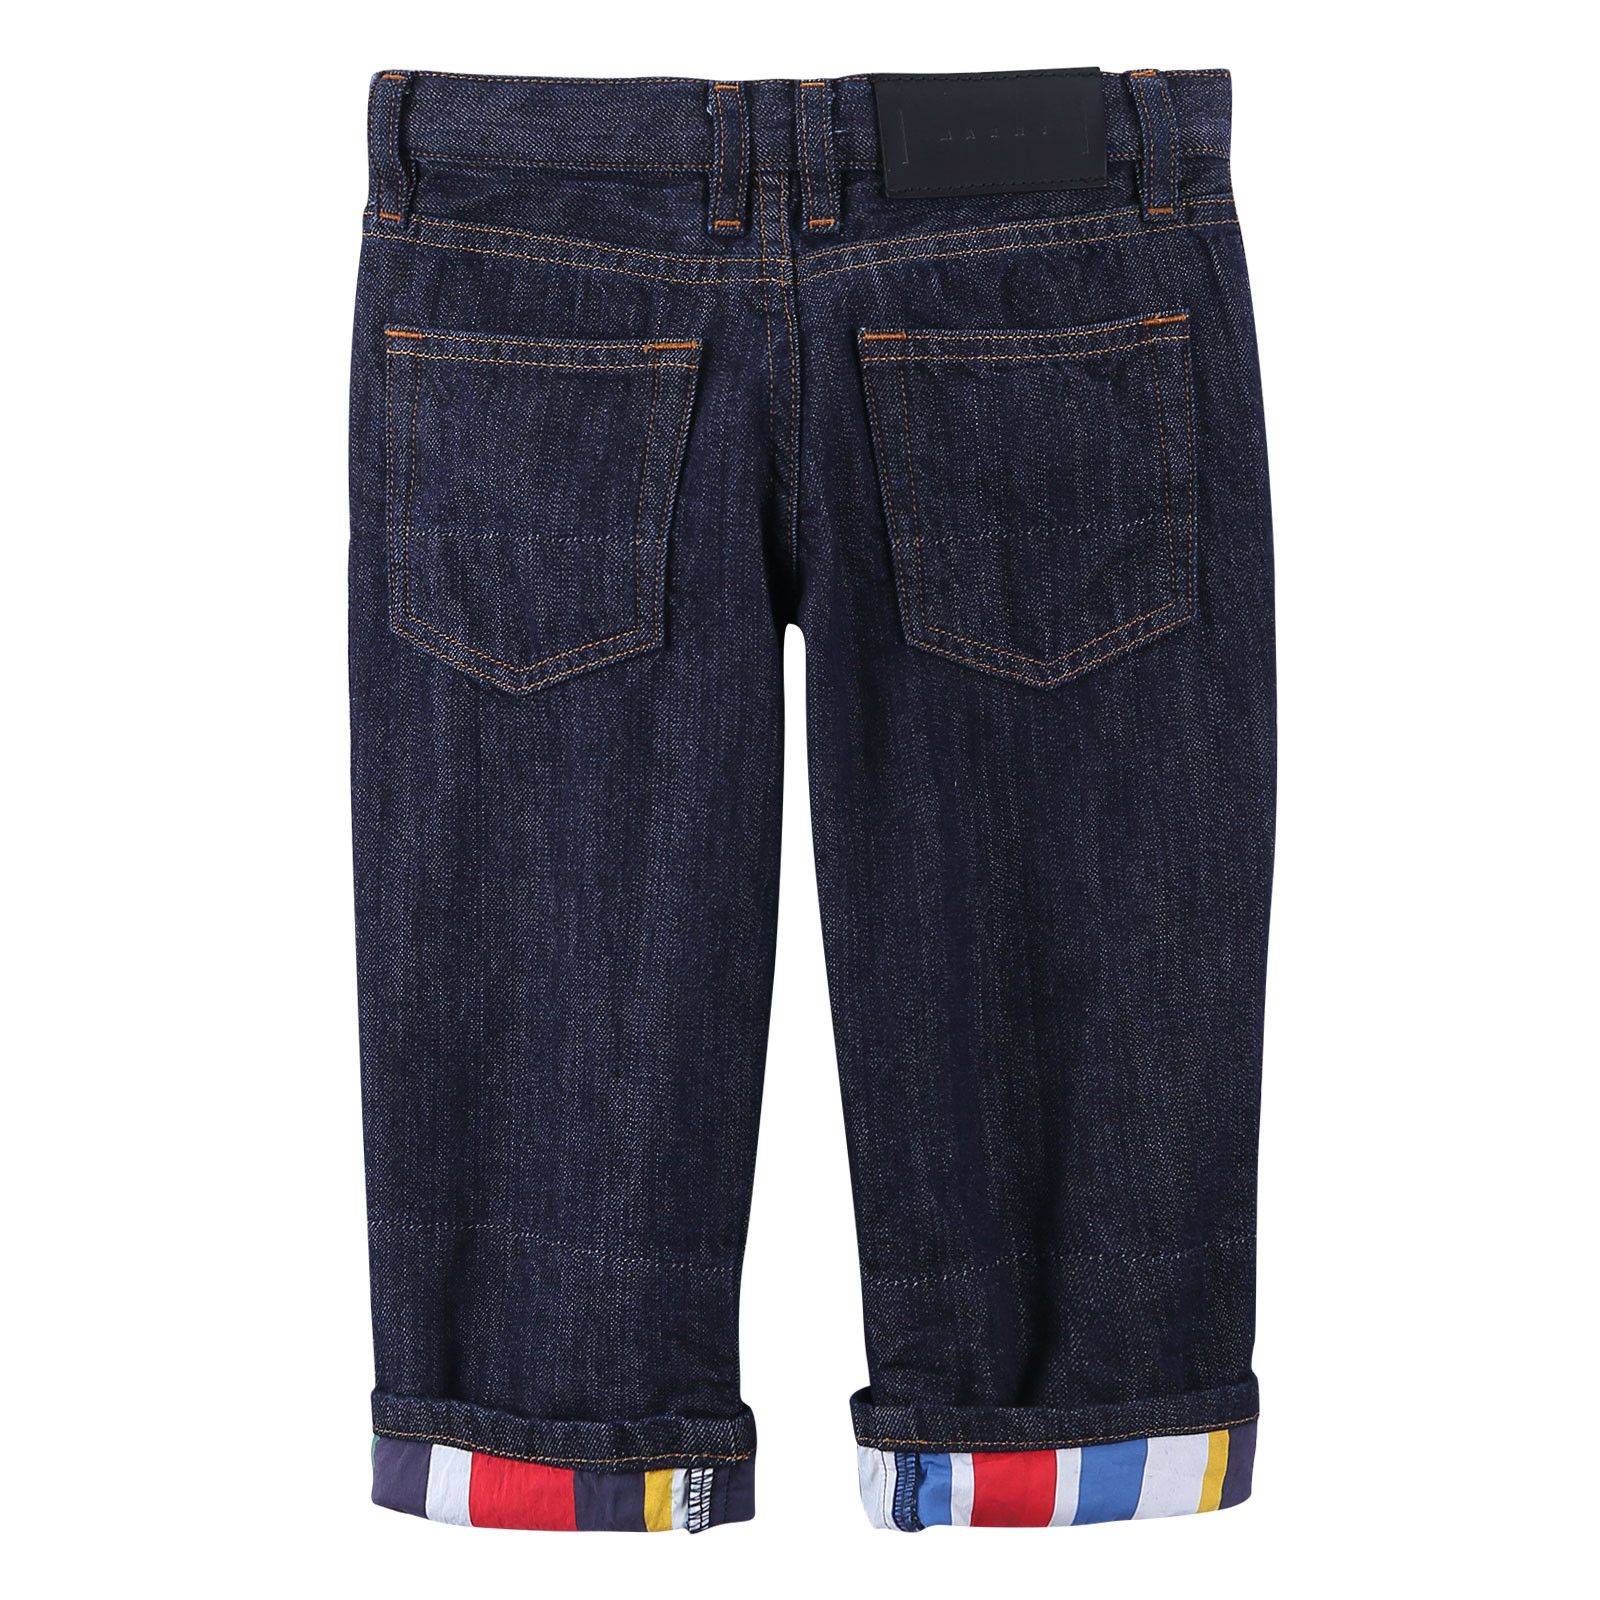 Girls Navy Blue Cotton Jeans With Multicolor Turn Up Cuffs - CÉMAROSE | Children's Fashion Store - 2